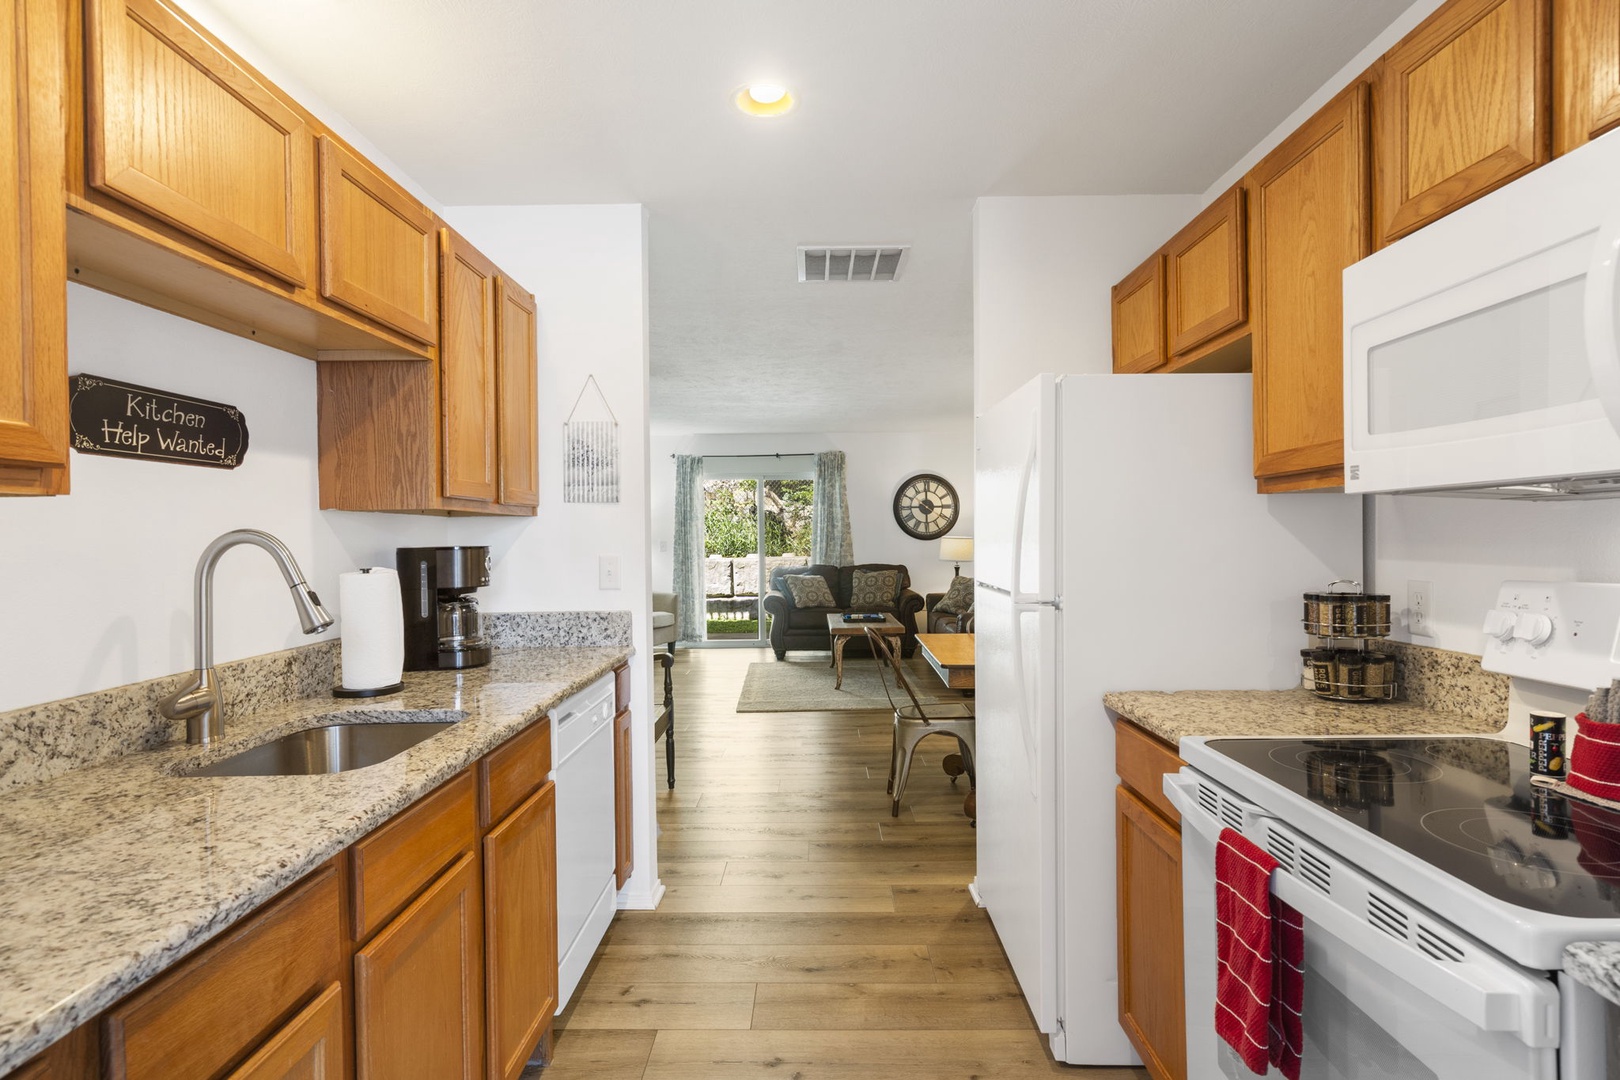 The airy kitchen offers wonderful amenities & ample storage space